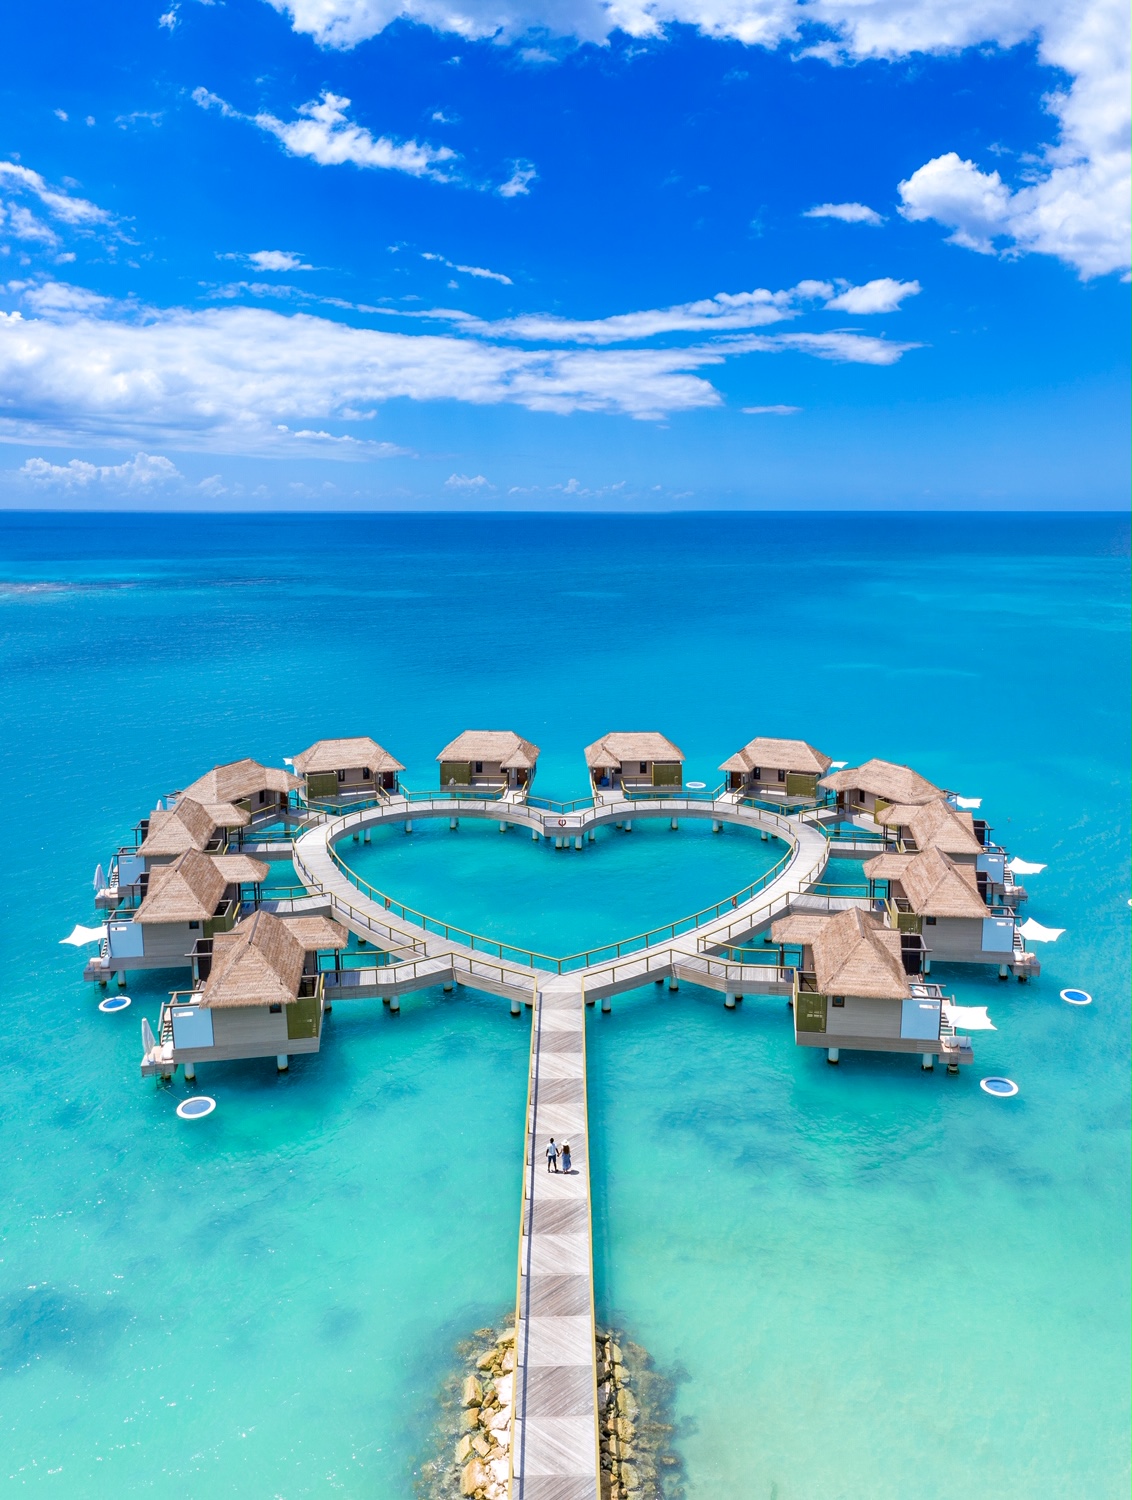 What To Expect At Sandals Overwater Bungalows In Jamaica - Follow Me Away